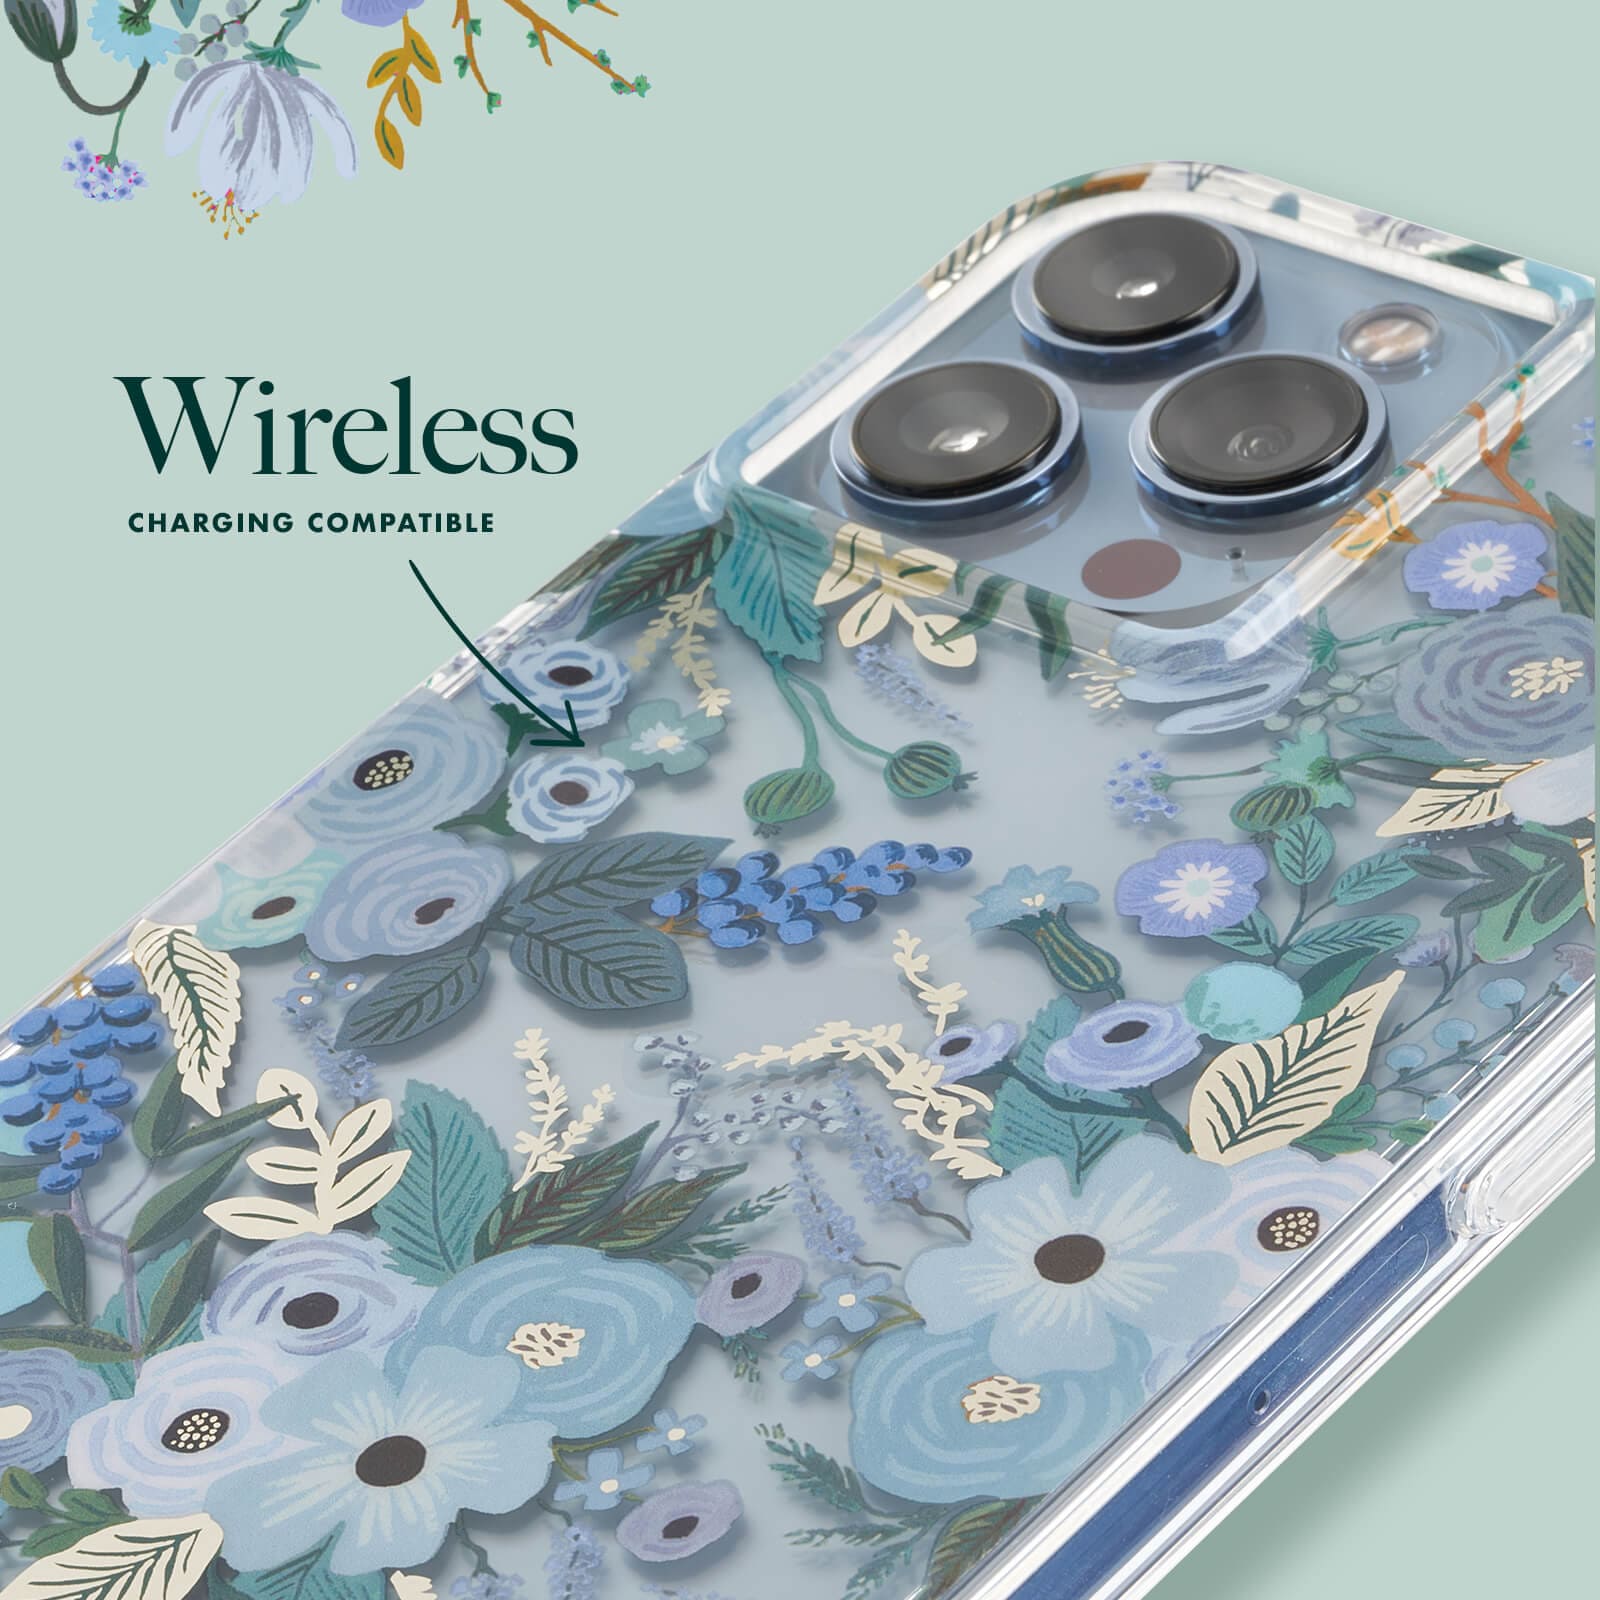 Wireless charging compatible. color::Garden Party Blue